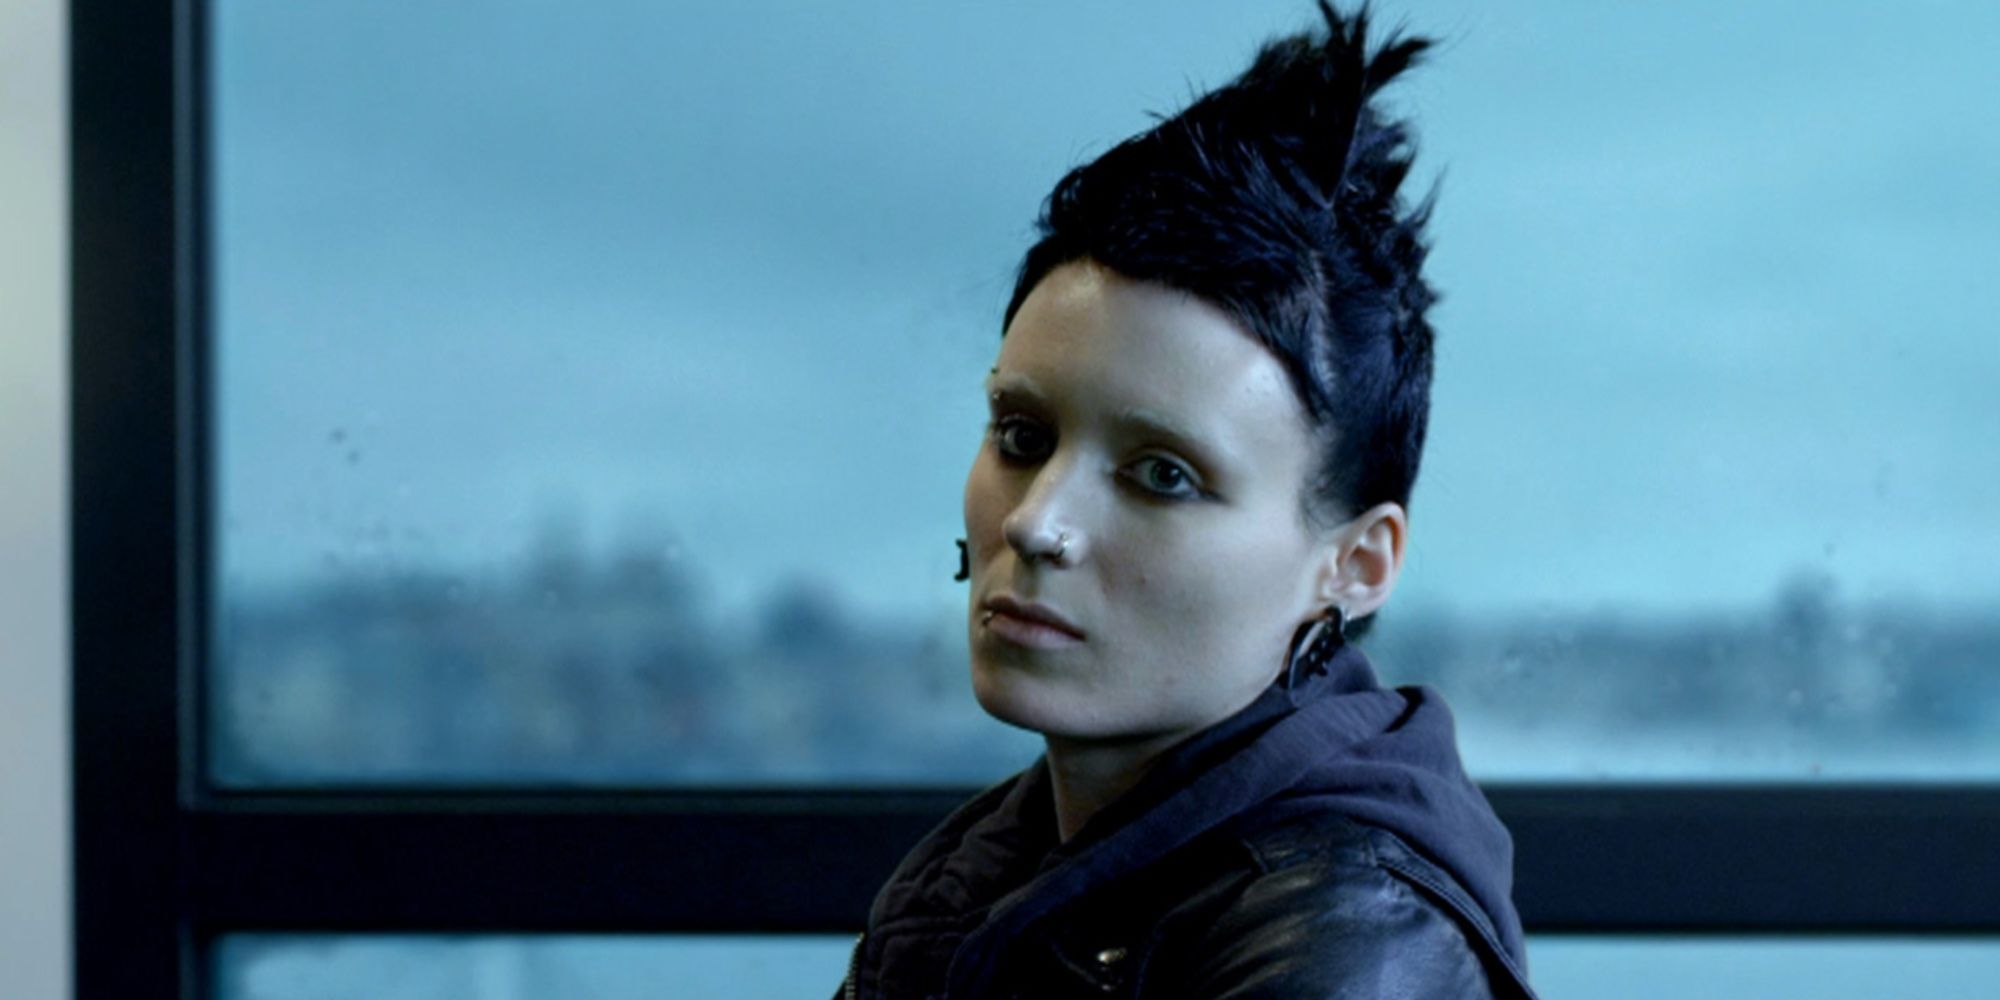 Rooney Mara in The Girl With The Dragon Tattoo